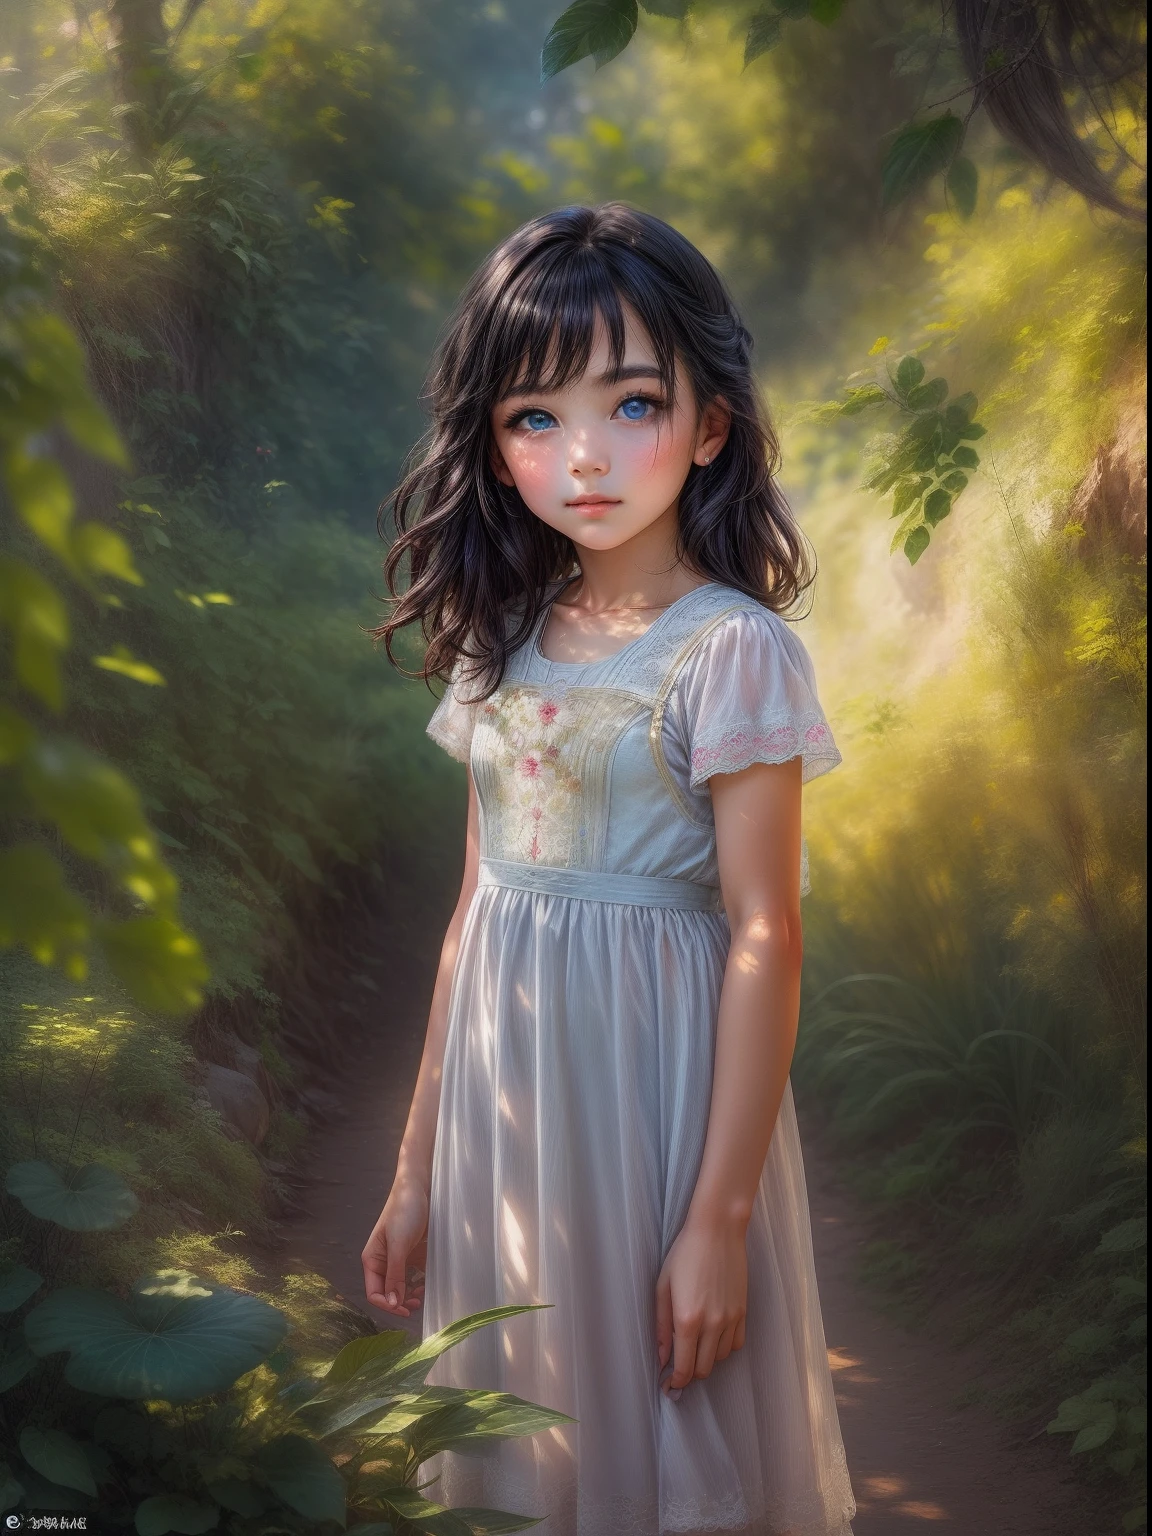 In this captivating image, a lone young girl takes centre stage, captivating the viewer with her presence. She stands in a picturesque outdoor setting, surrounded by lush vegetation and bathed in soft golden light. Her black hair cascades over her shoulders, framing her face, while her bewitching blue eyes shine with depth and intrigue. Tilting her head slightly, she looks directly at the viewer, her expression conveying a mixture of confidence and vulnerability. The emphasis is on her striking features and natural beauty, expertly captured in this hyper-realistic, high-resolution portrait. The background is deliberately slightly blurred, accentuating the focus on the young girl and adding depth to the composition. This photographic masterpiece captures both the outer and inner essence of the young girl, leaving the viewer captivated by her presence. The image will be rendered in a 9:16 format, allowing for a vertical composition that highlights the stature and presence of the young girl.